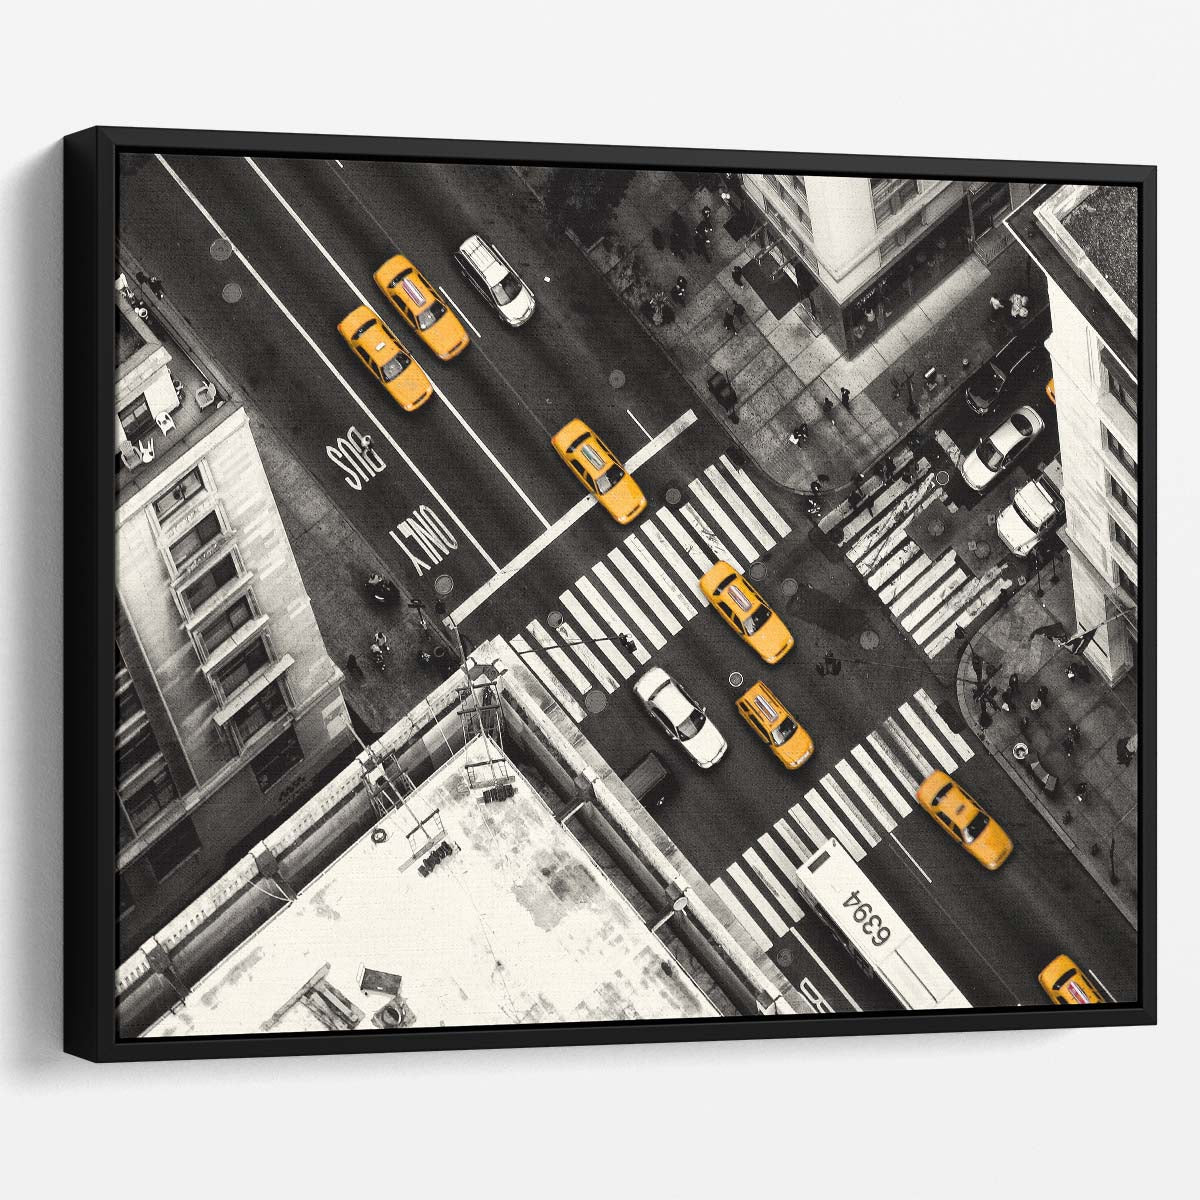 NYC Yellow Cab Street Scene Wall Art by Luxuriance Designs. Made in USA.